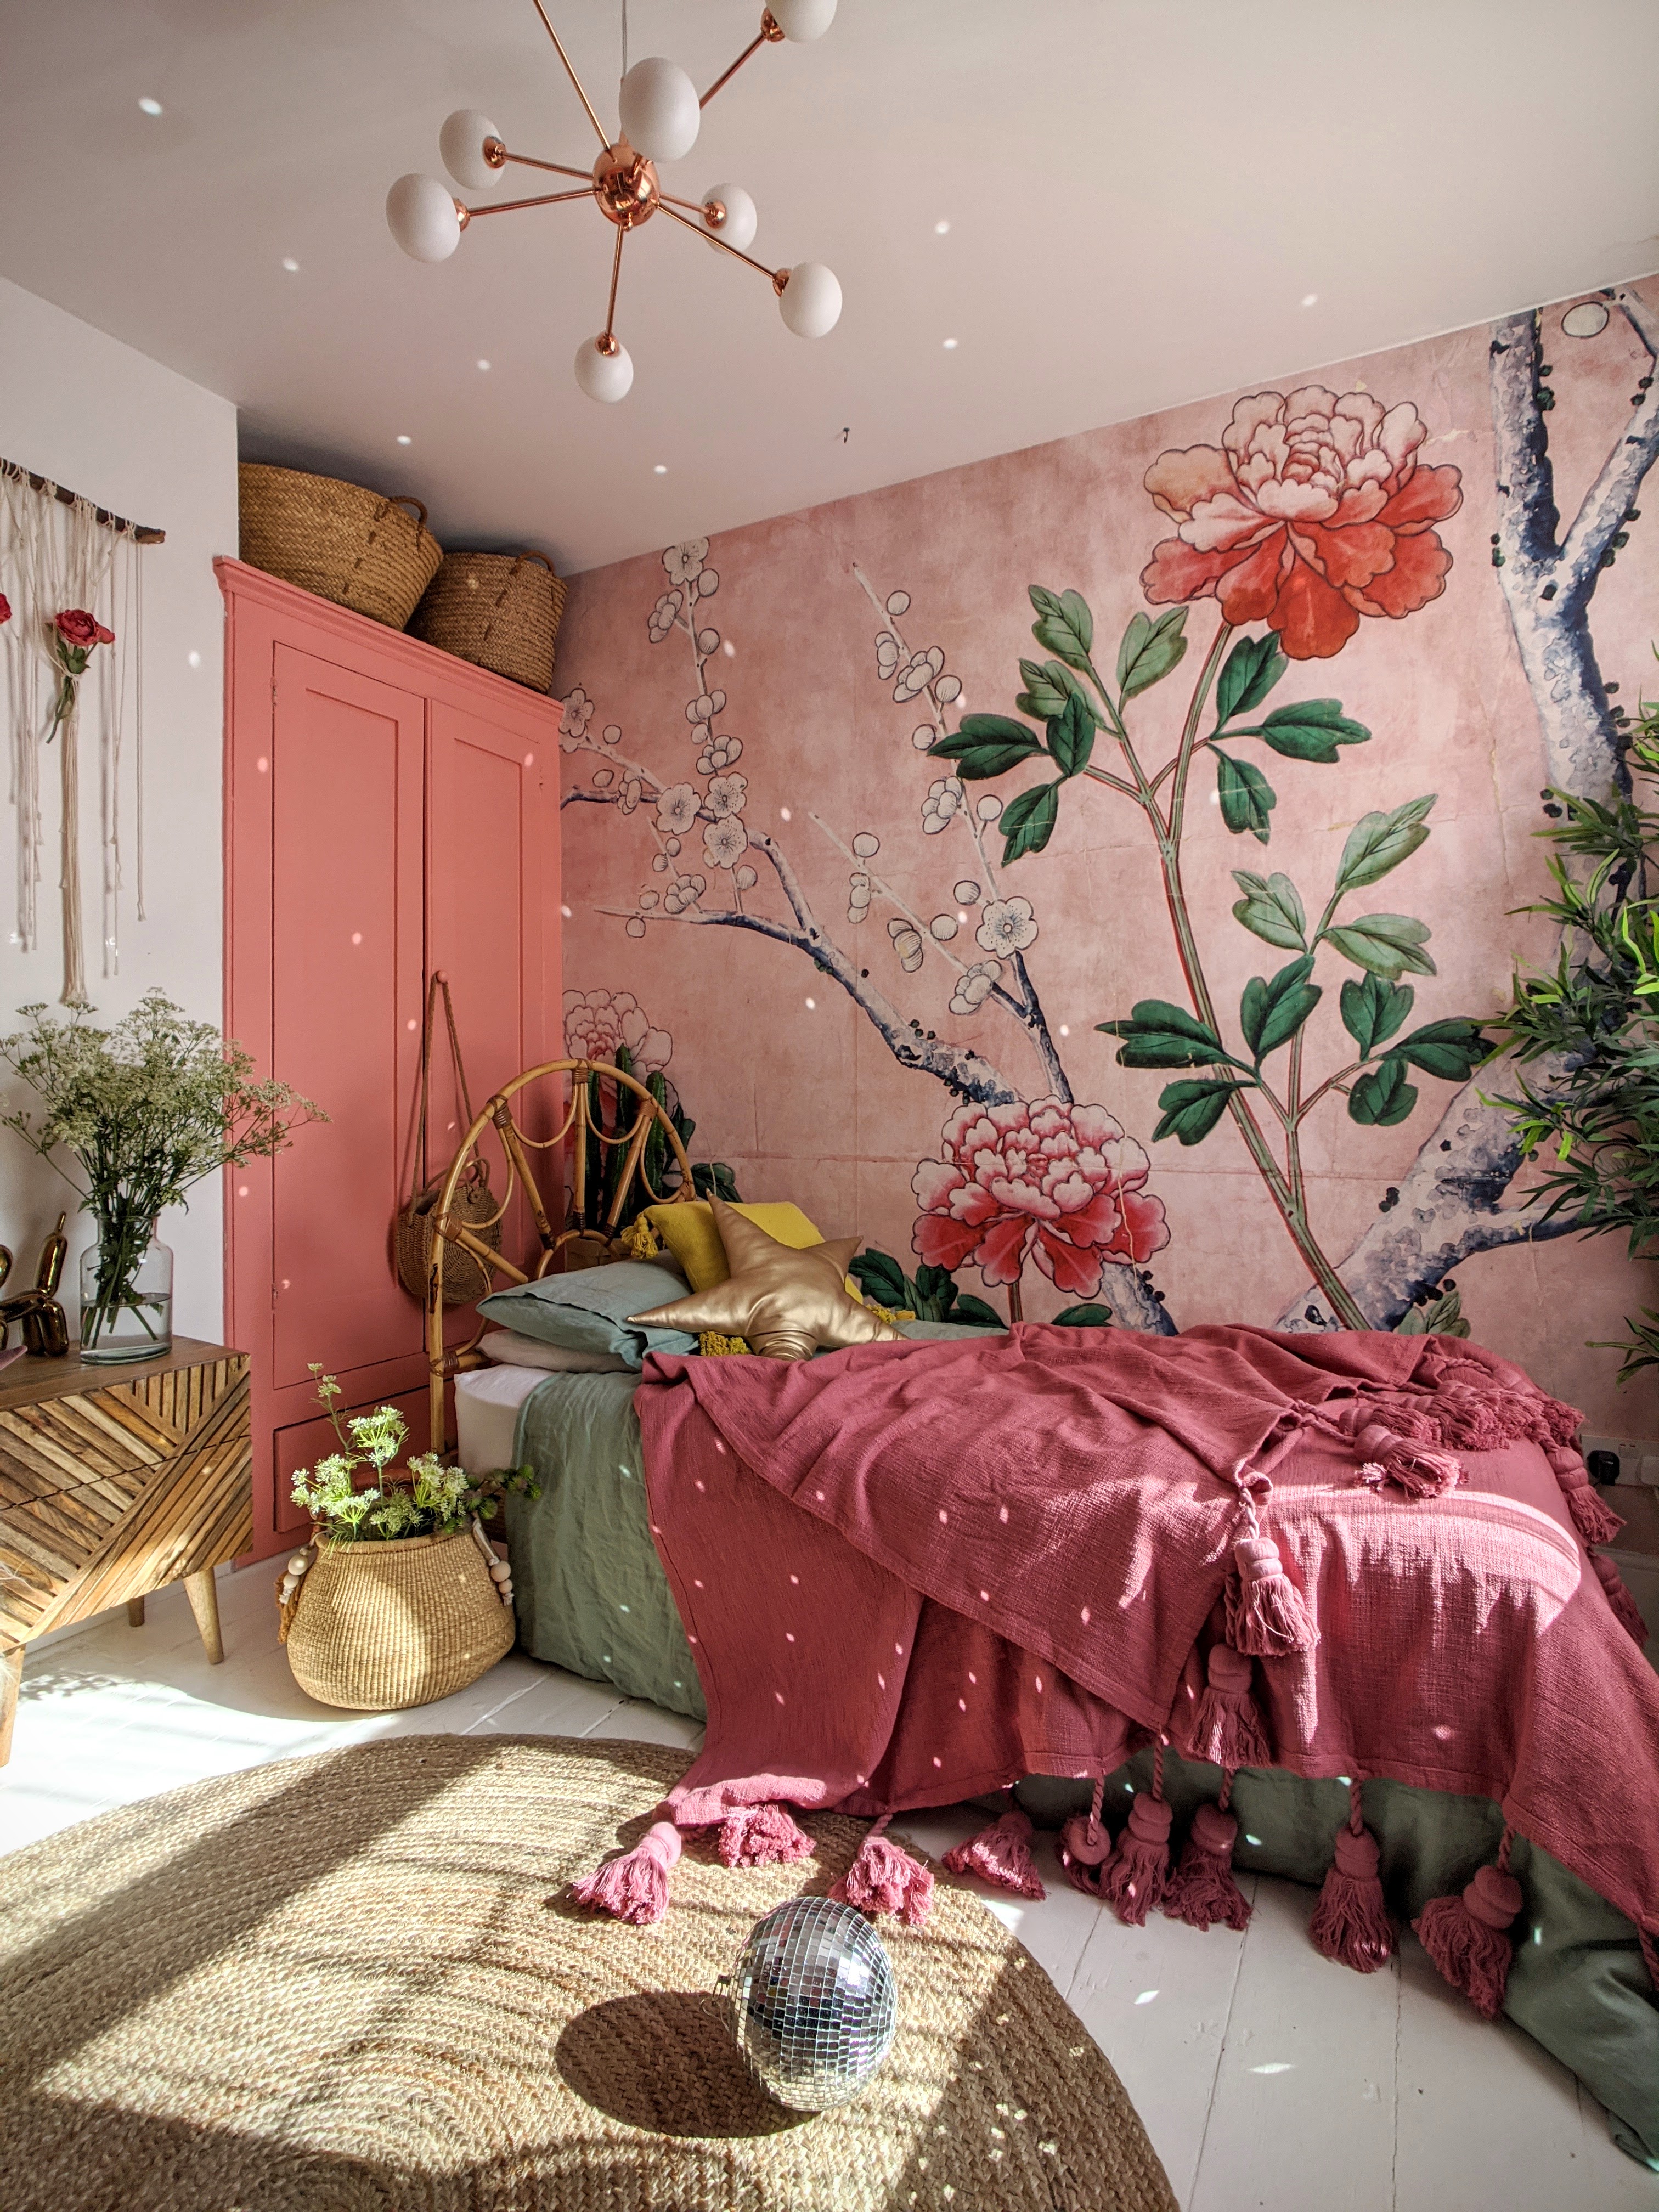 Pink floral wall mural in bedroom with jute rug, modern pendant lighting and pink throw